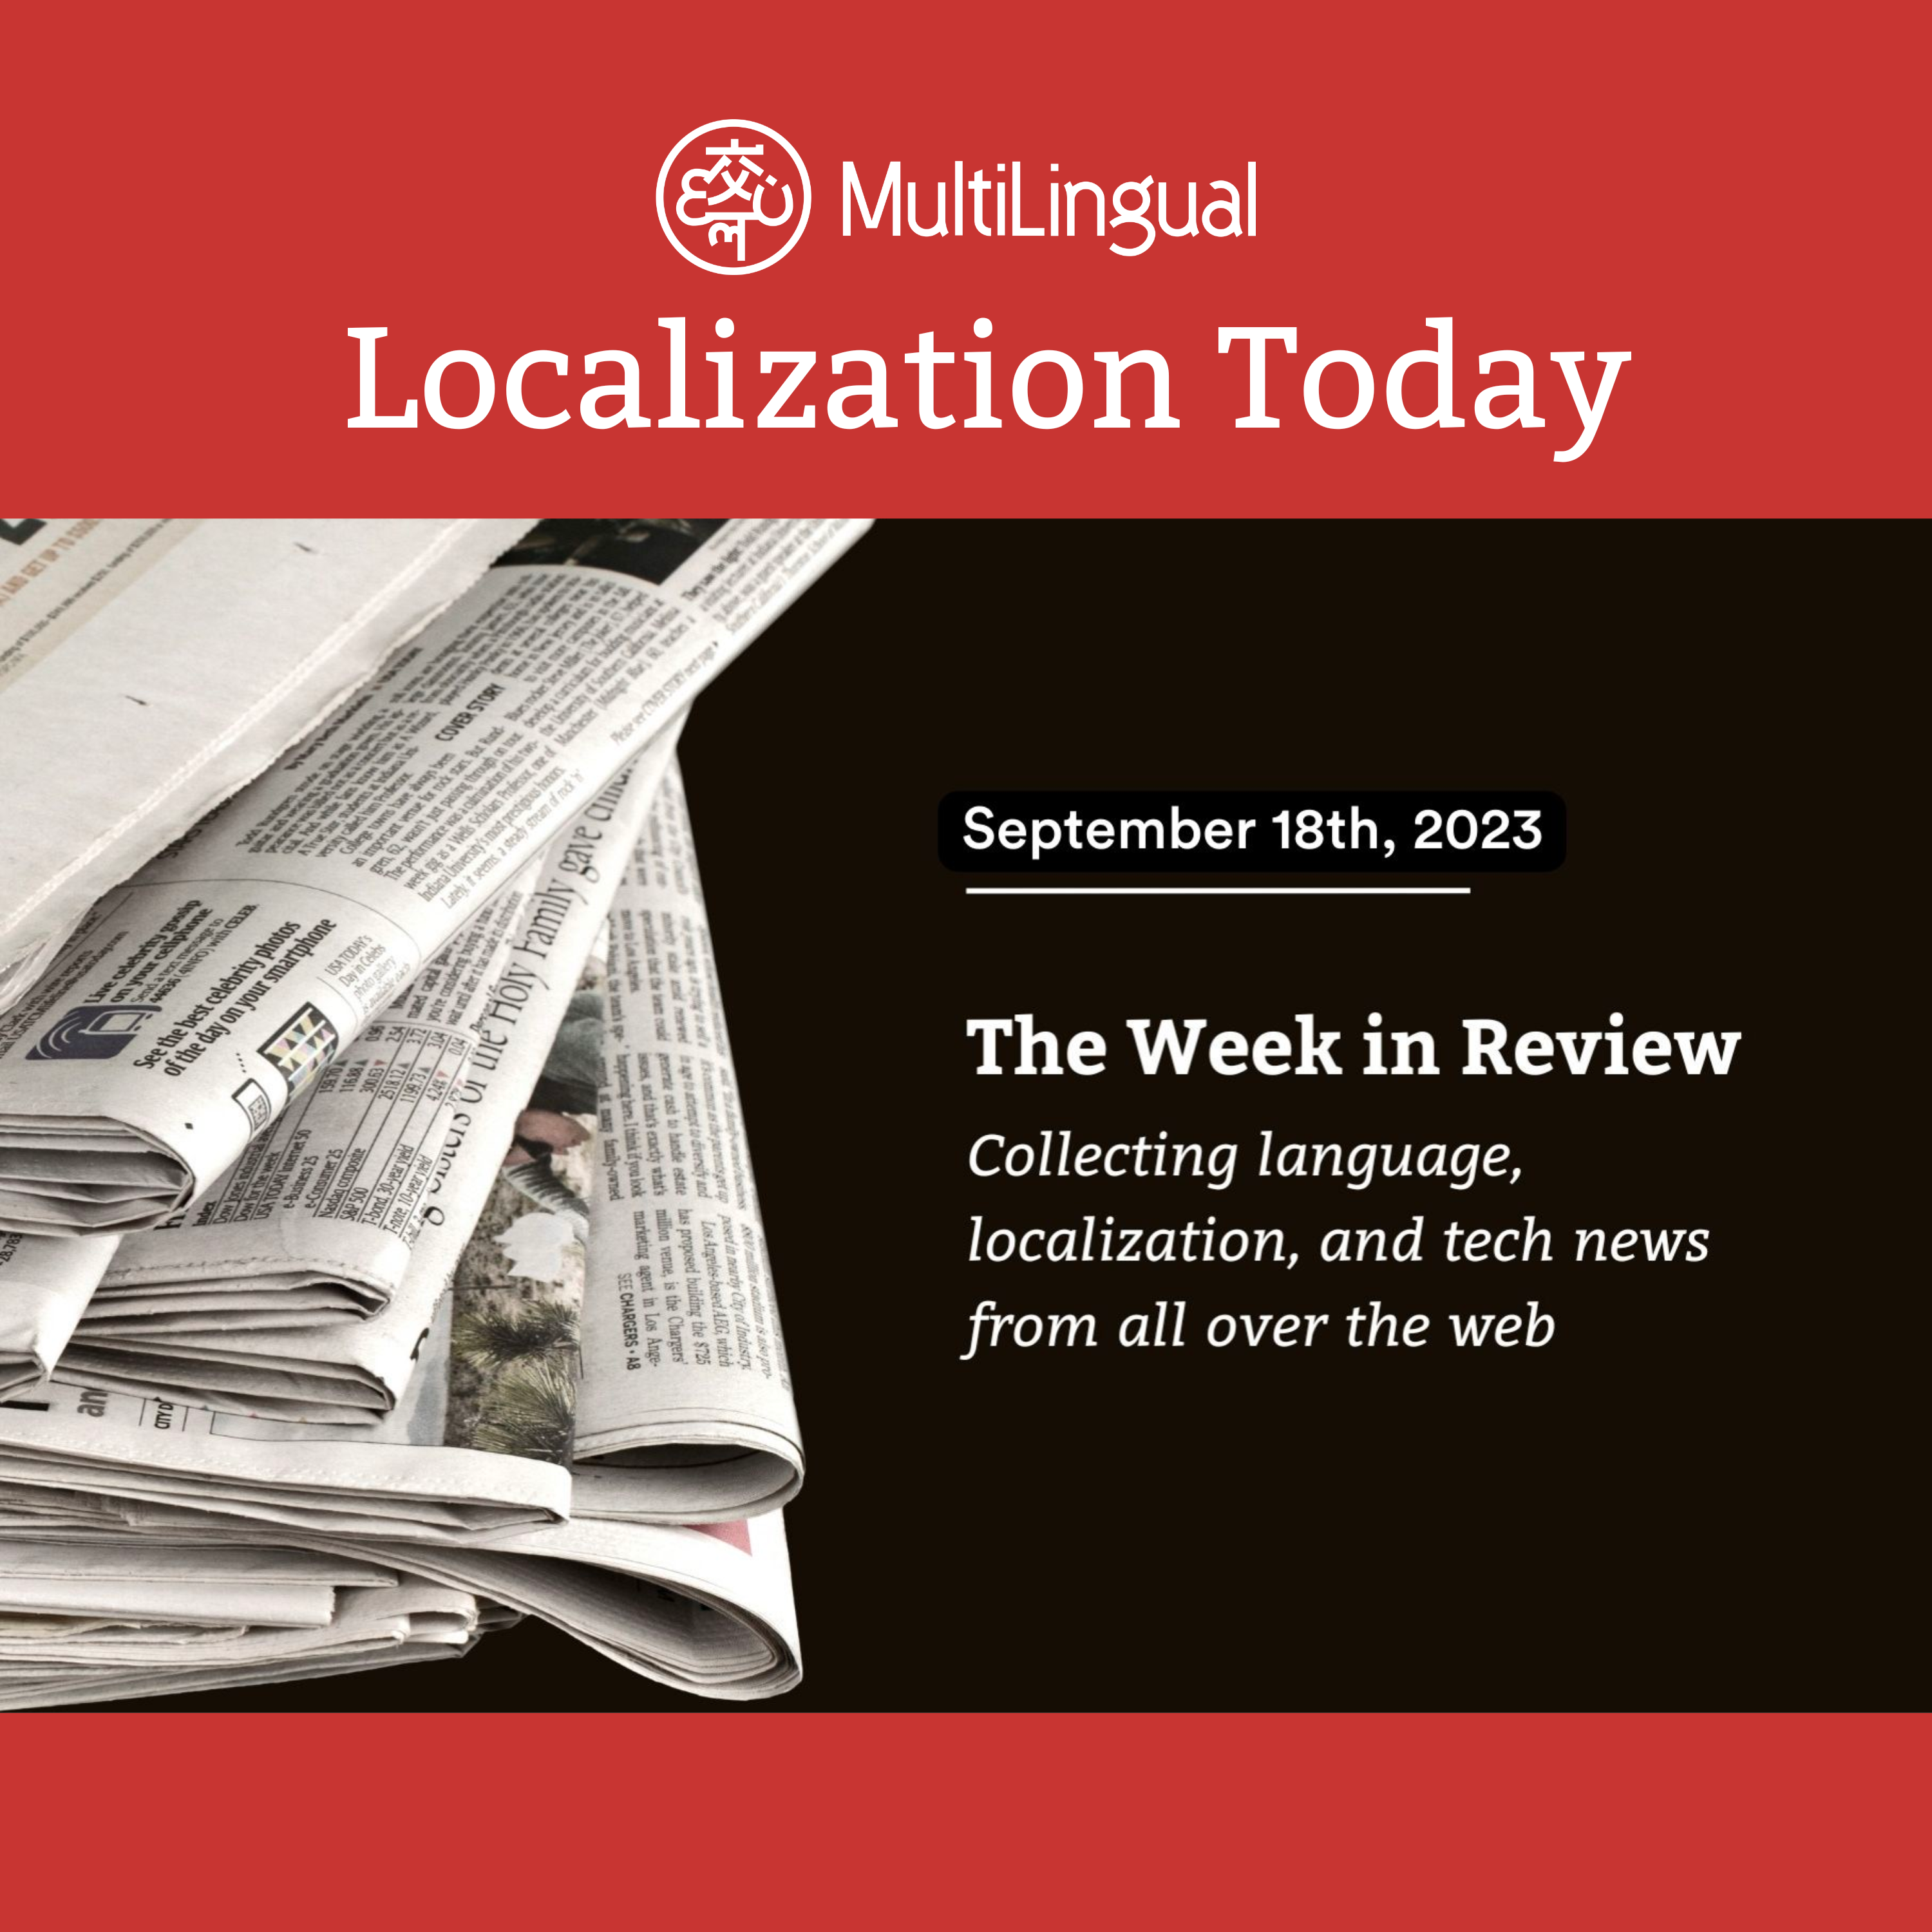 The Week in Review: September 18, 2023